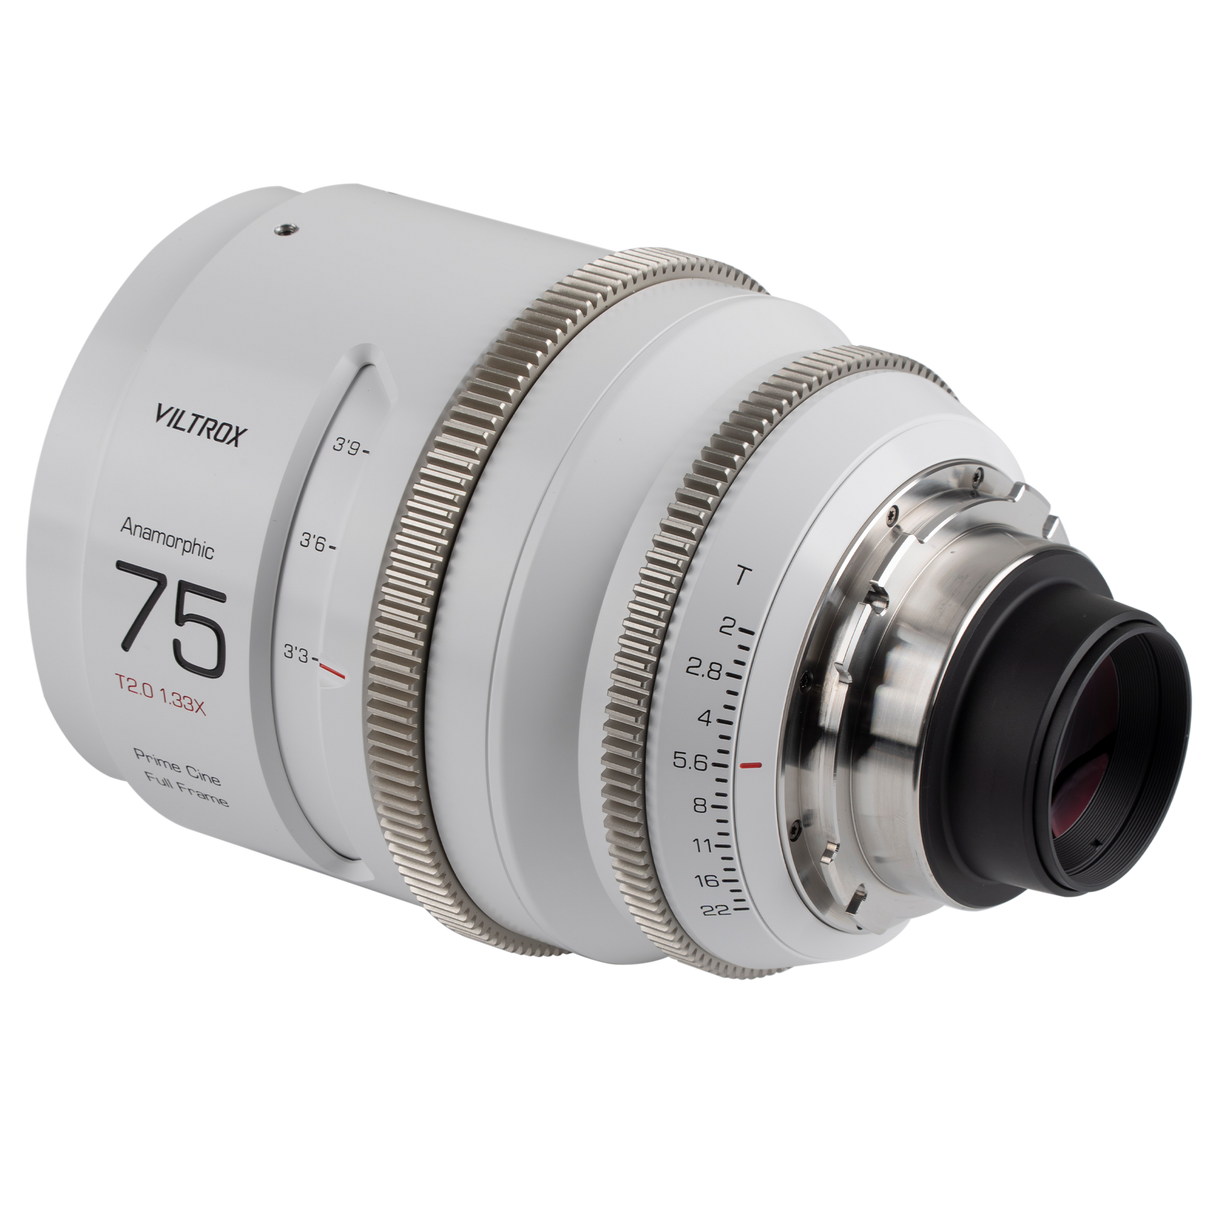 Anamorphic cine lens 75 mm T/2.0 1.33x with PL mount